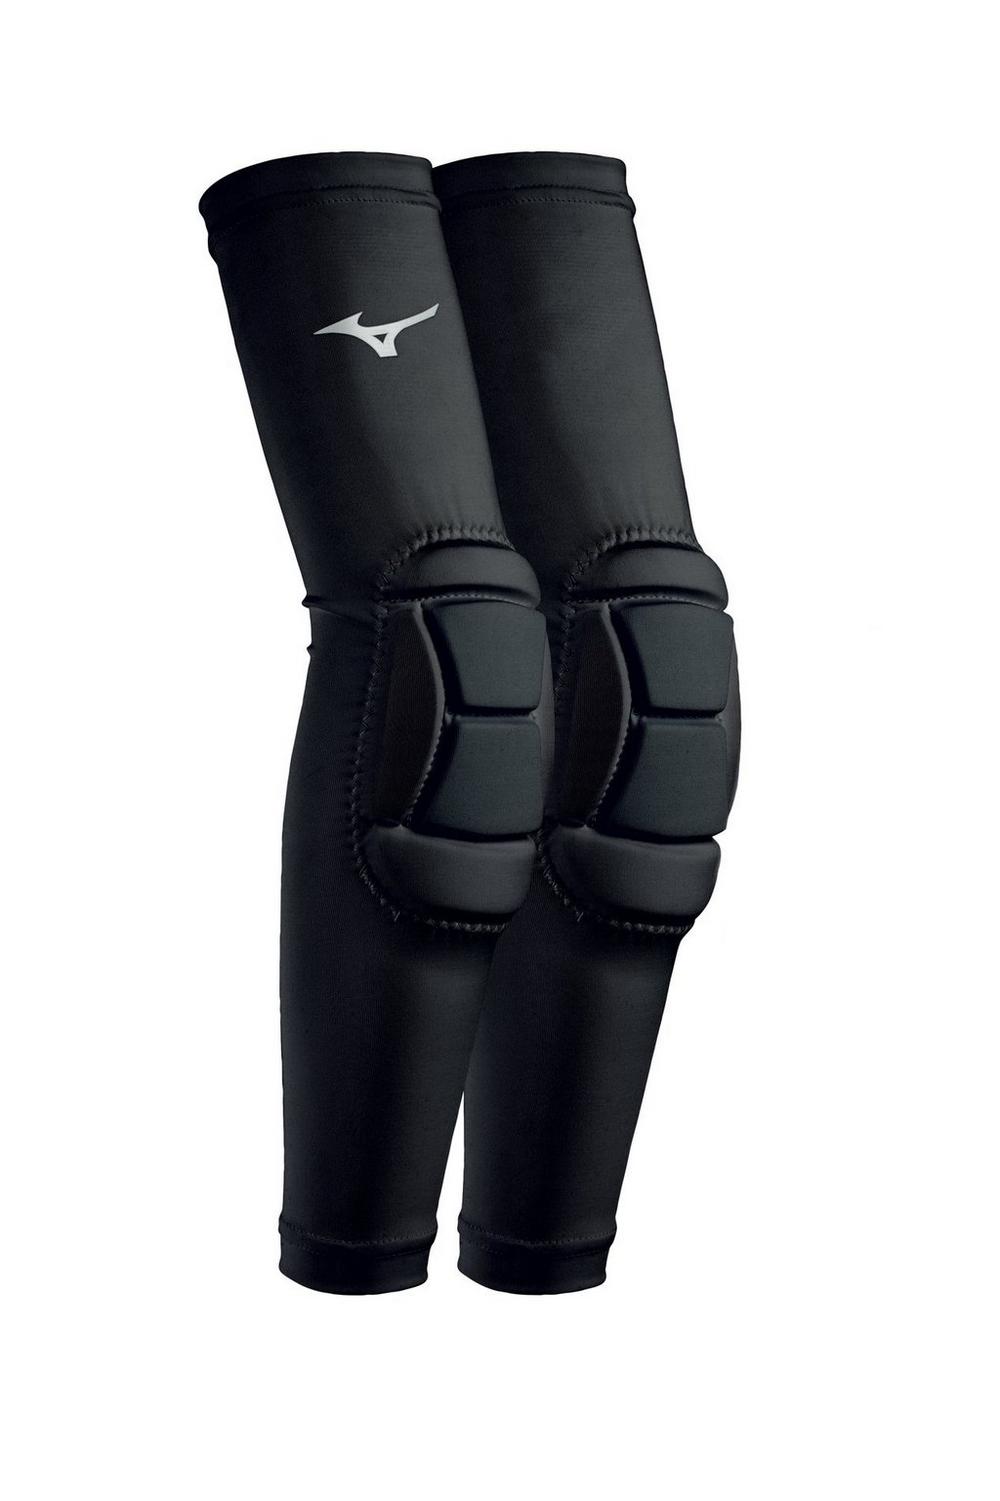 Elbow Sleeves & Elbow Pads